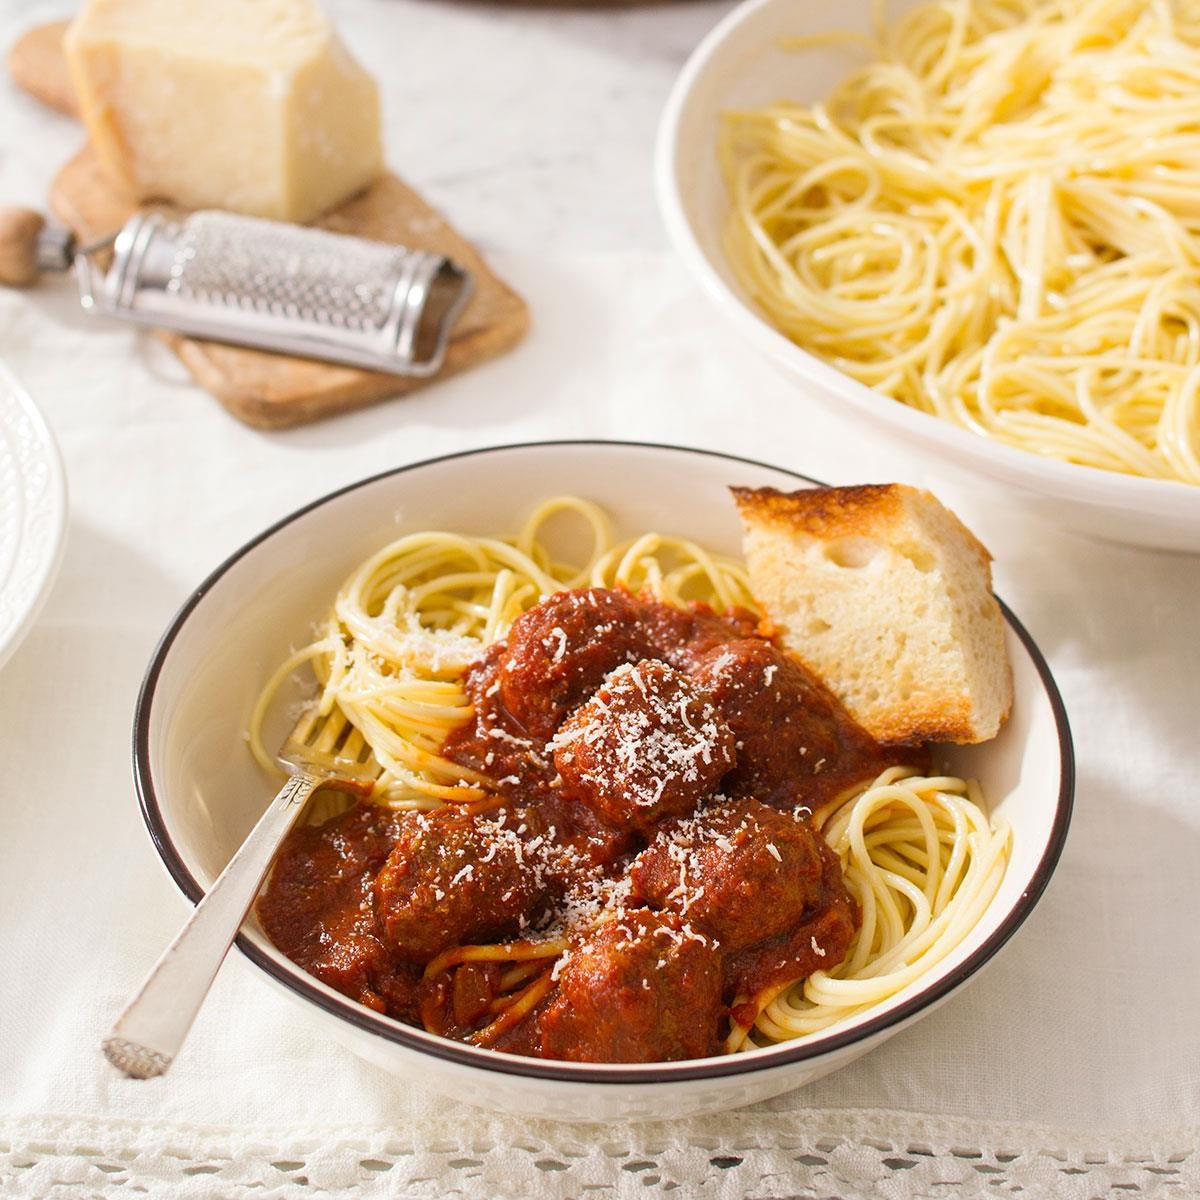 Best Spaghetti And Meatballs Exps Thso17 1912 B04 19 11b 1